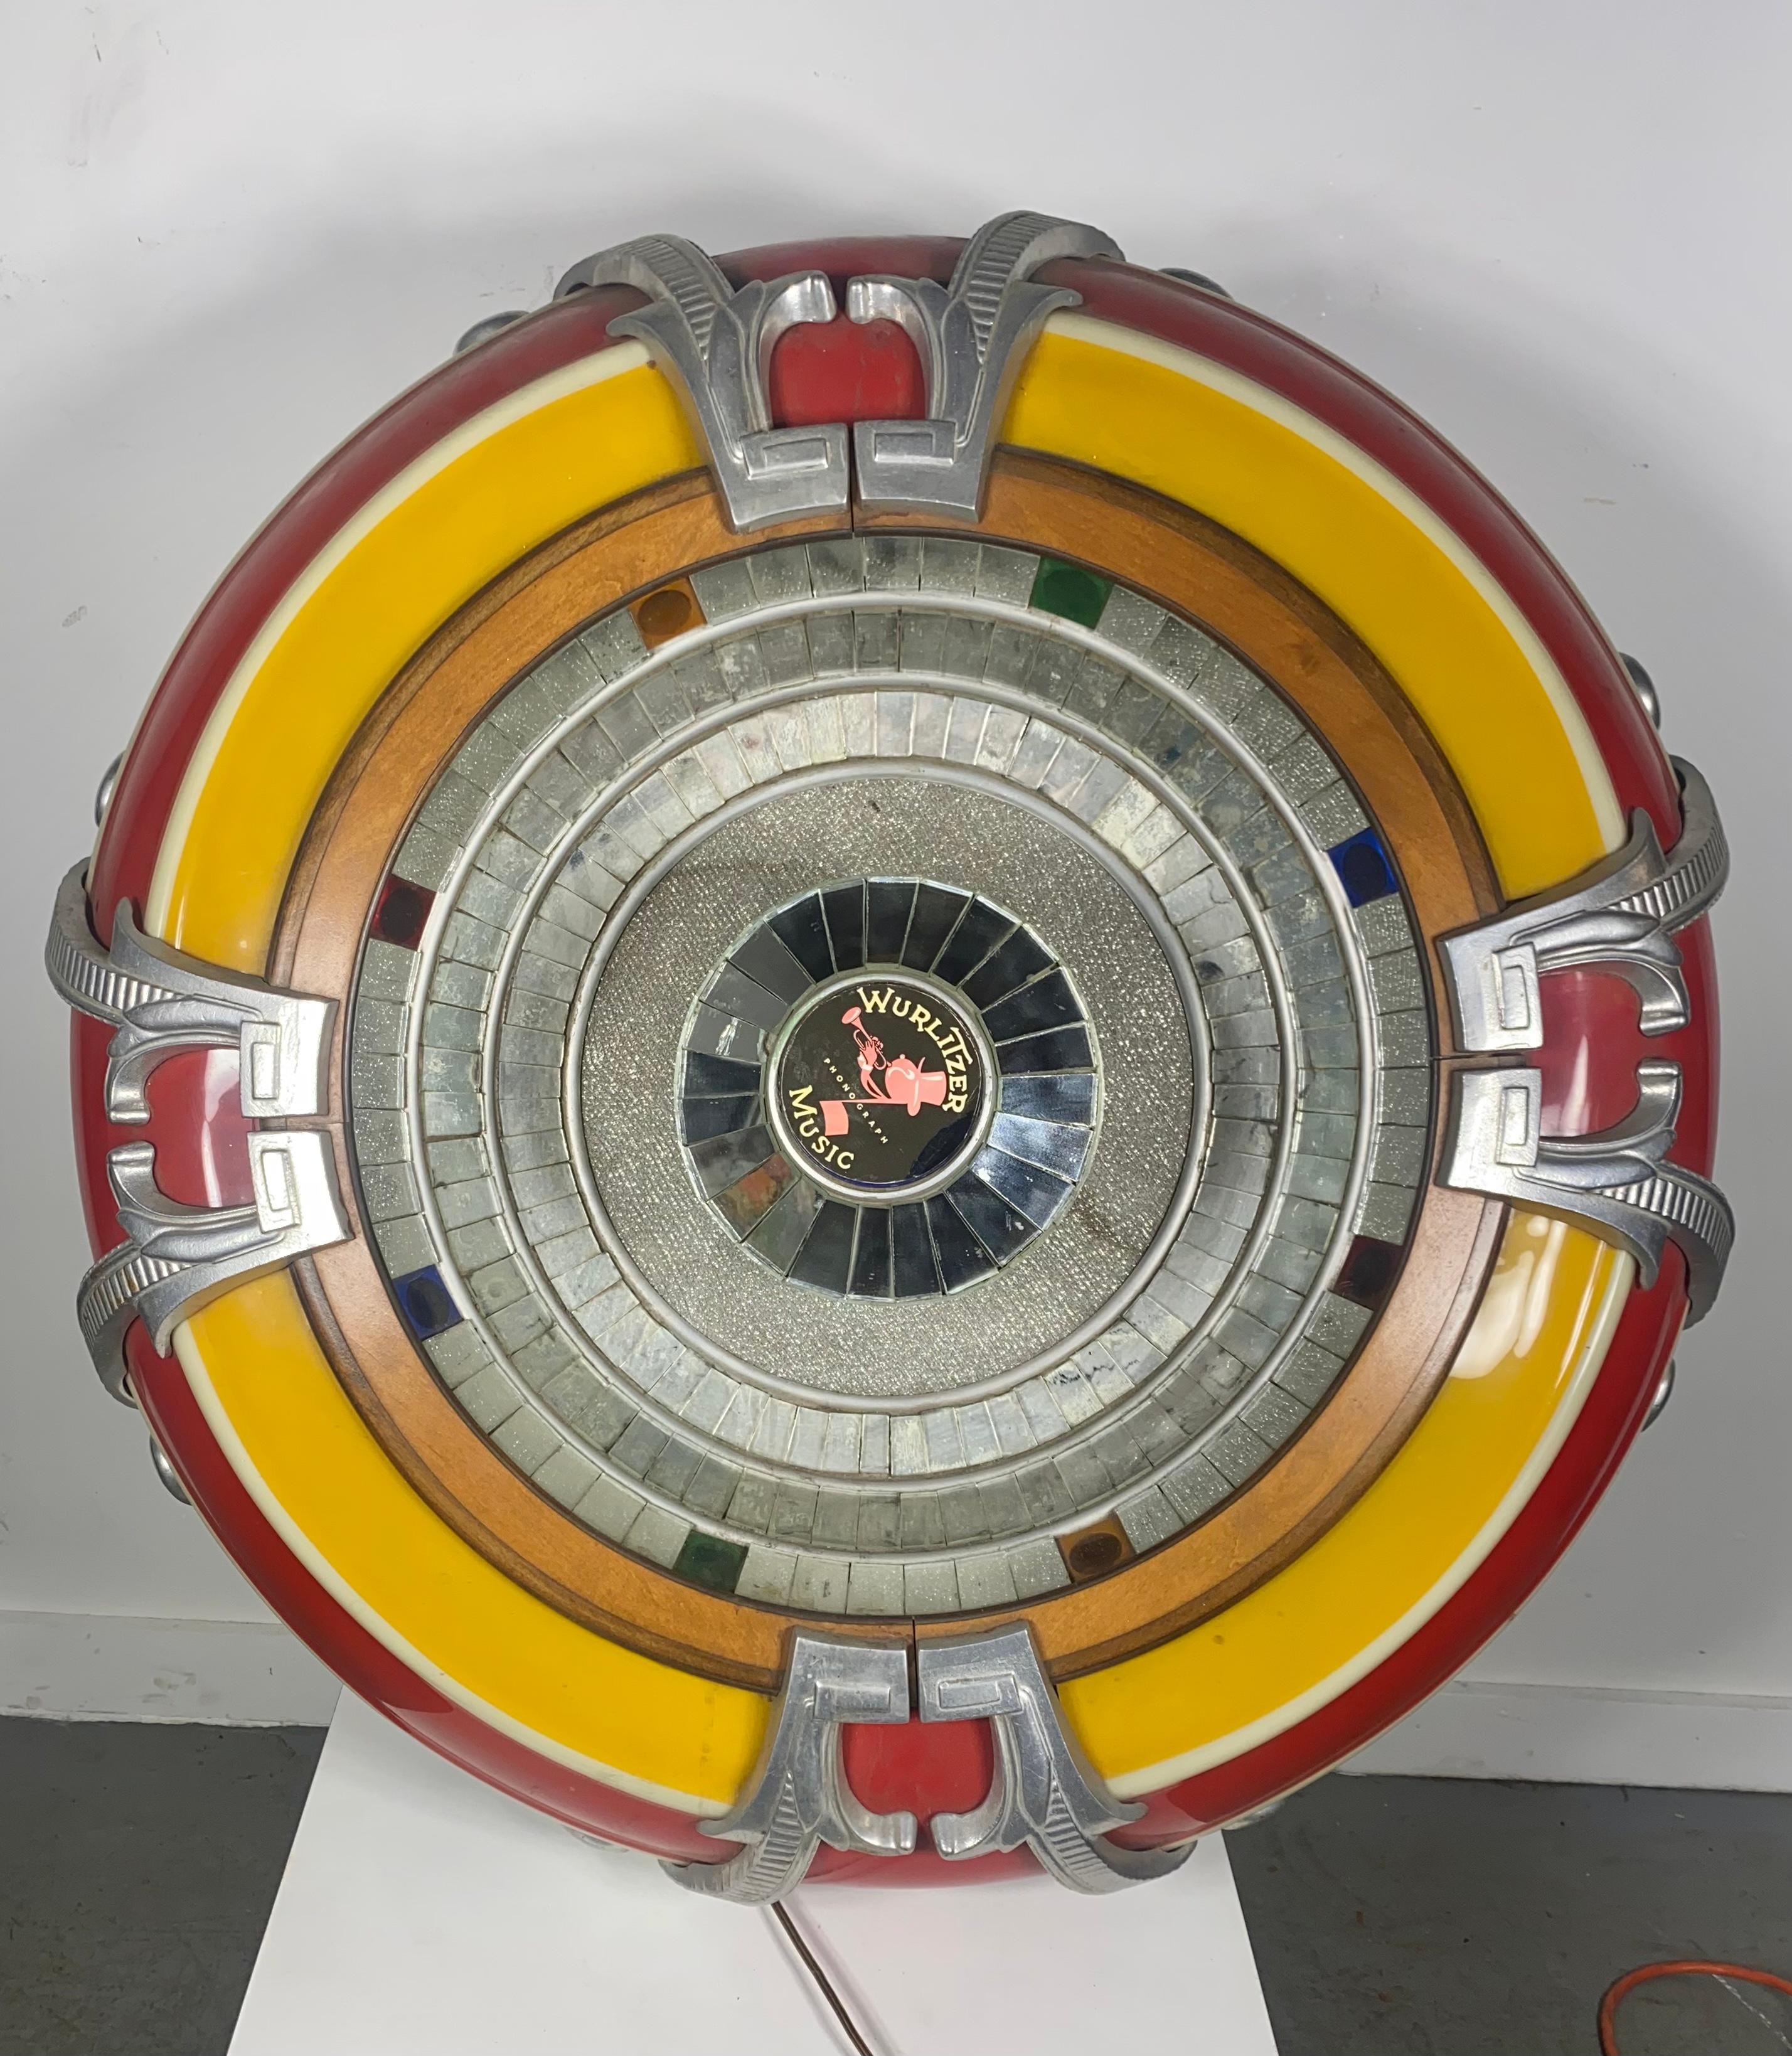 Rare Original 1946 Wurlitzer Jukebox  4008 Speaker, , bubbler. External speaker designed for the famed classic 1015 Wurlitzer Jukebox,, Amazing original condition,, minor crack to small spinning front mirror (see photo).. Tested and sounds